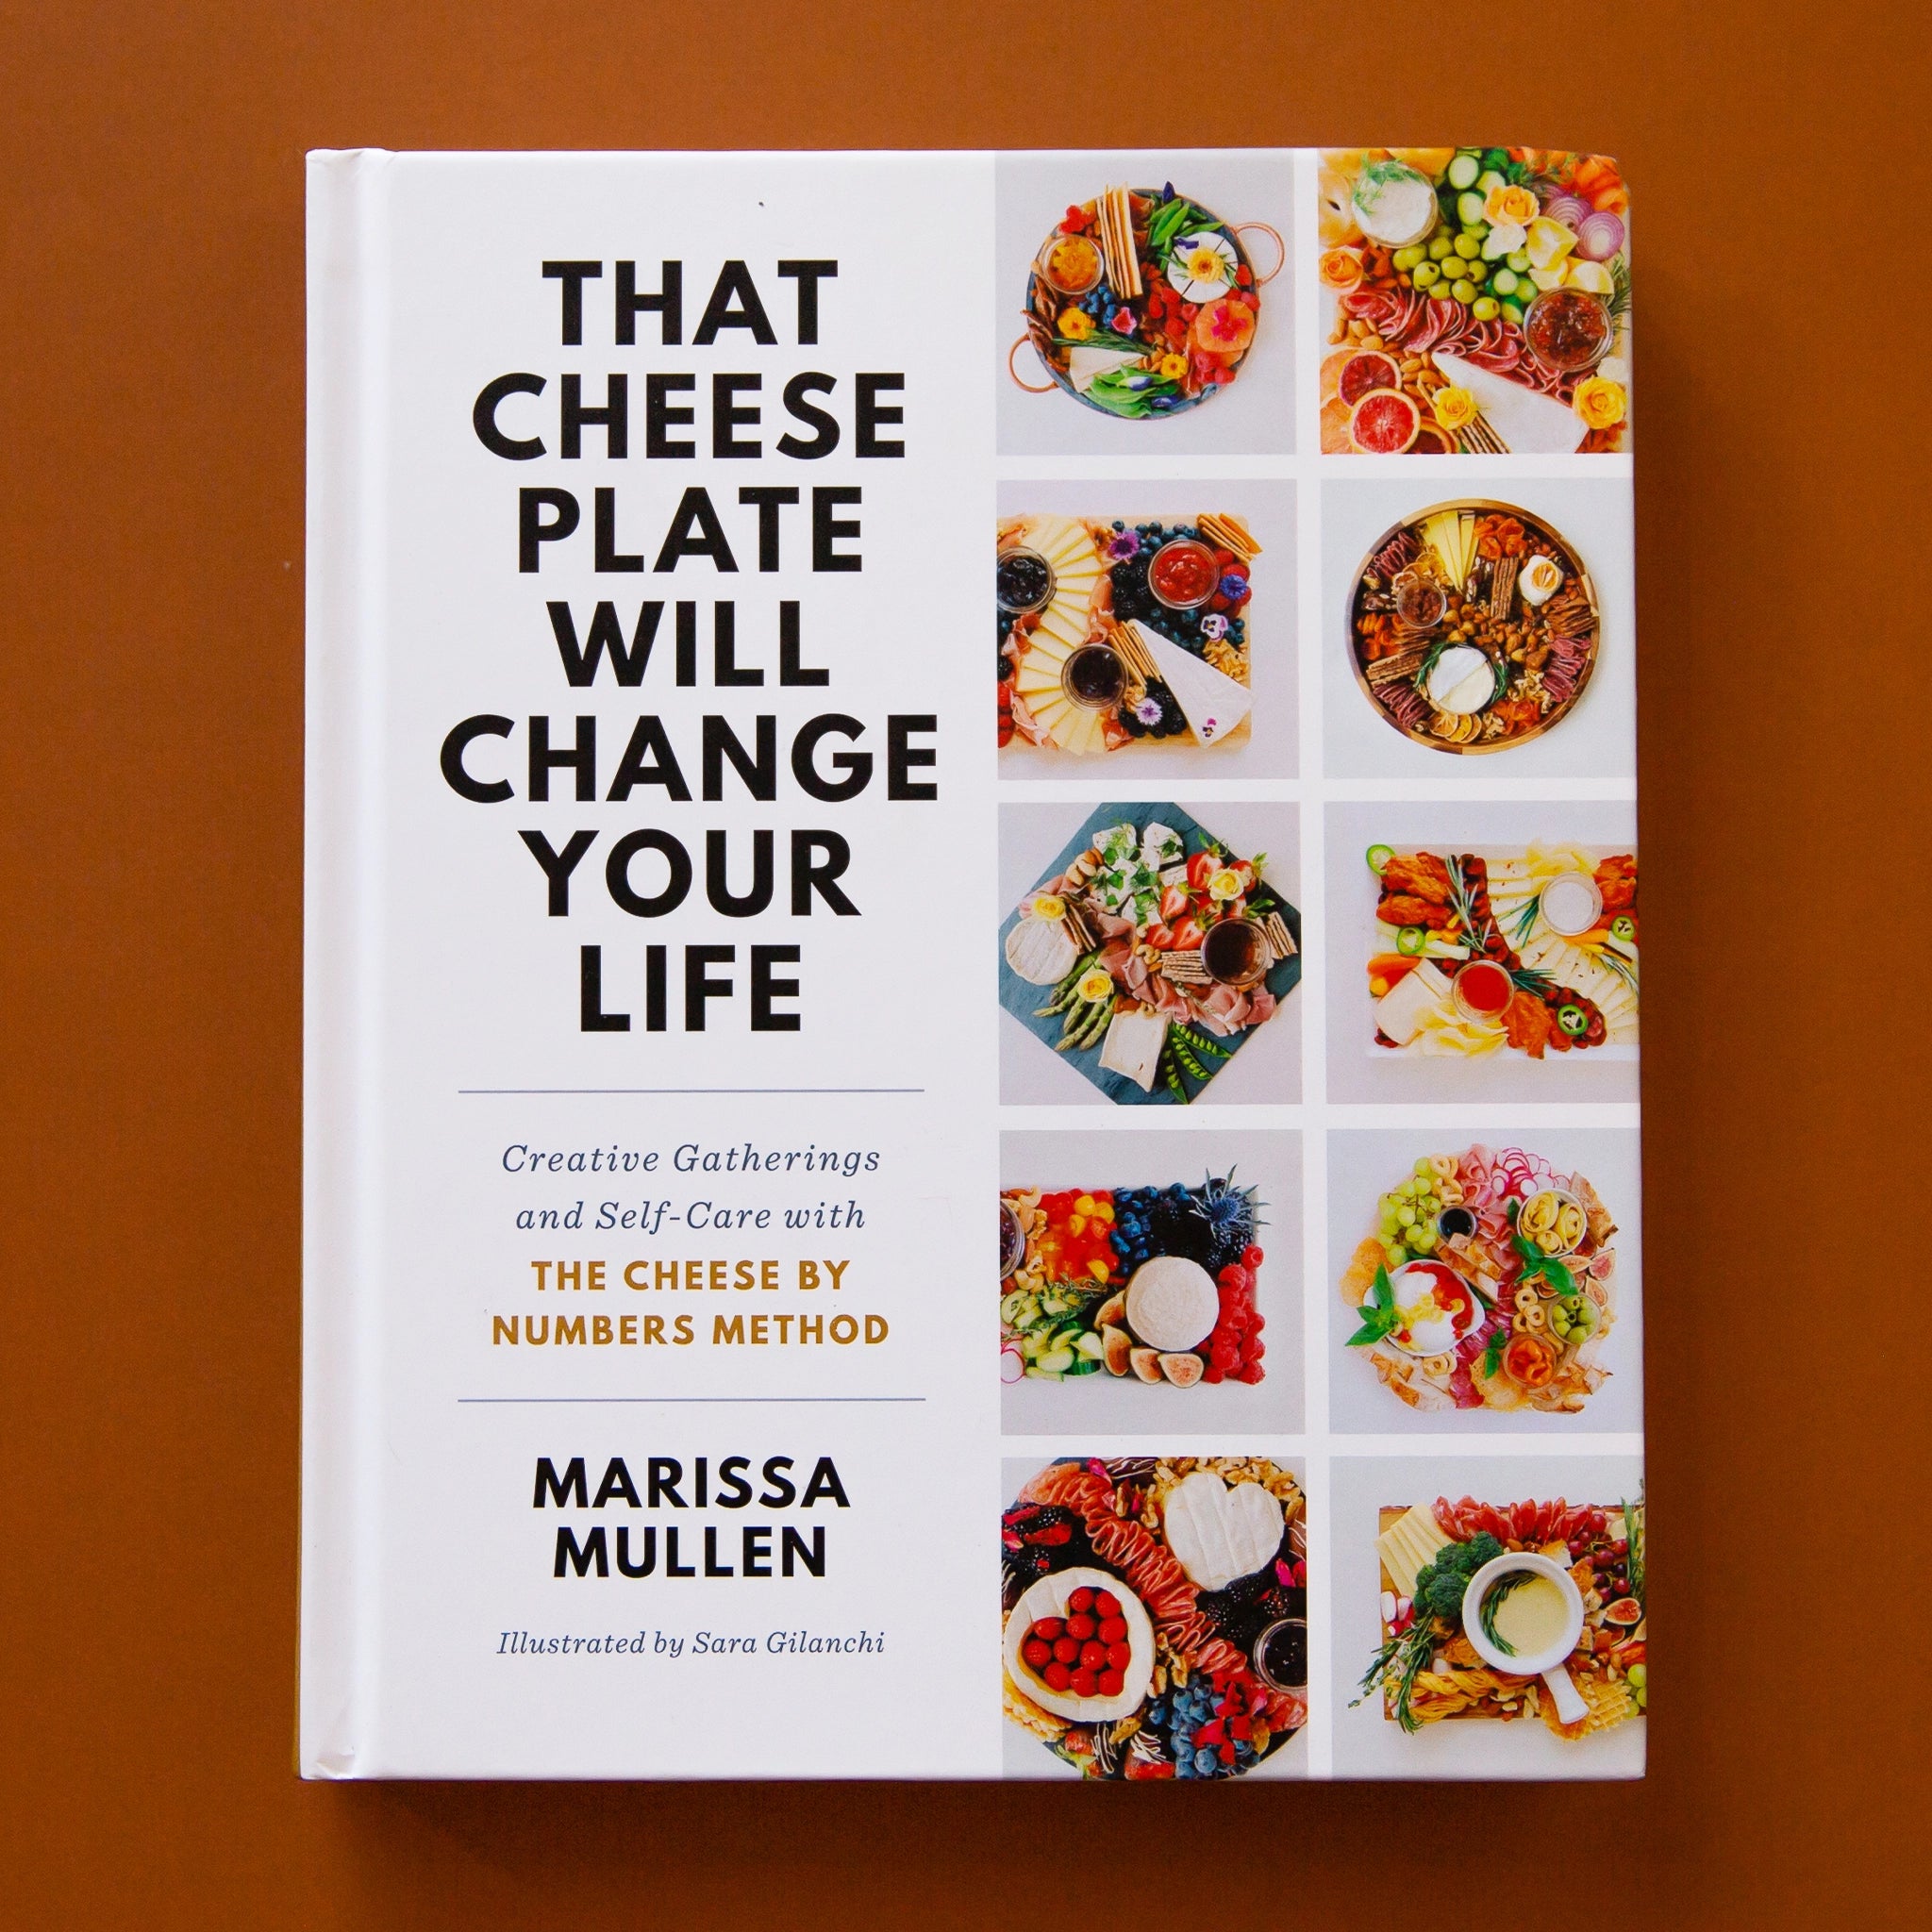 The front cover of the book reads 'That Cheese Plate Will Change Your Life' in bold black lettering on the left side. Below reads 'Creative Gathering and Self-Care with The Cheese by Numbers Method' in smaller text. To the right is 10 squares filled with a variety of well put together charcuterie boards, filled with cheeses, crackers, jams and more.